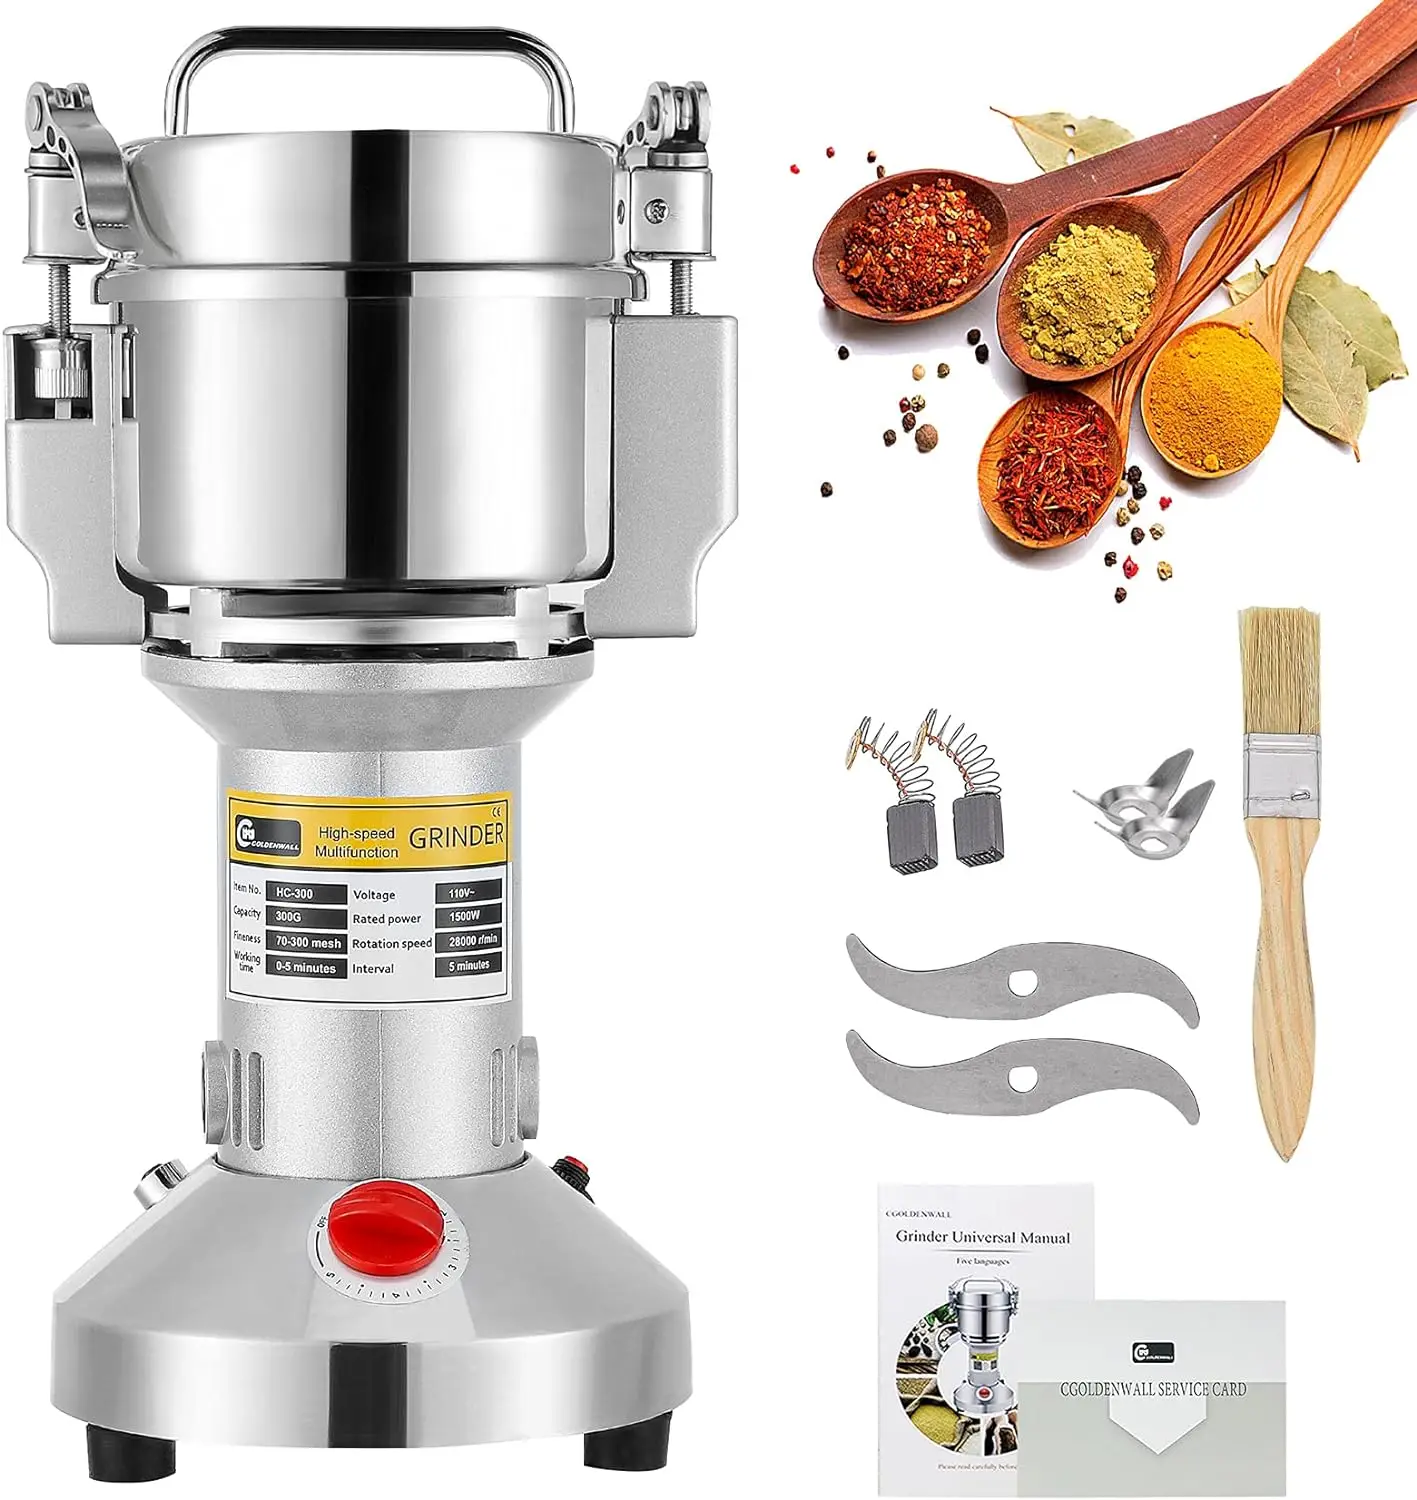 

CGOLDENWALL 300g Electric Grain Mill Grinder Safety Upgraded Spice Grinder Pulverizer Stainless Steel Machine for Dry Spices Her